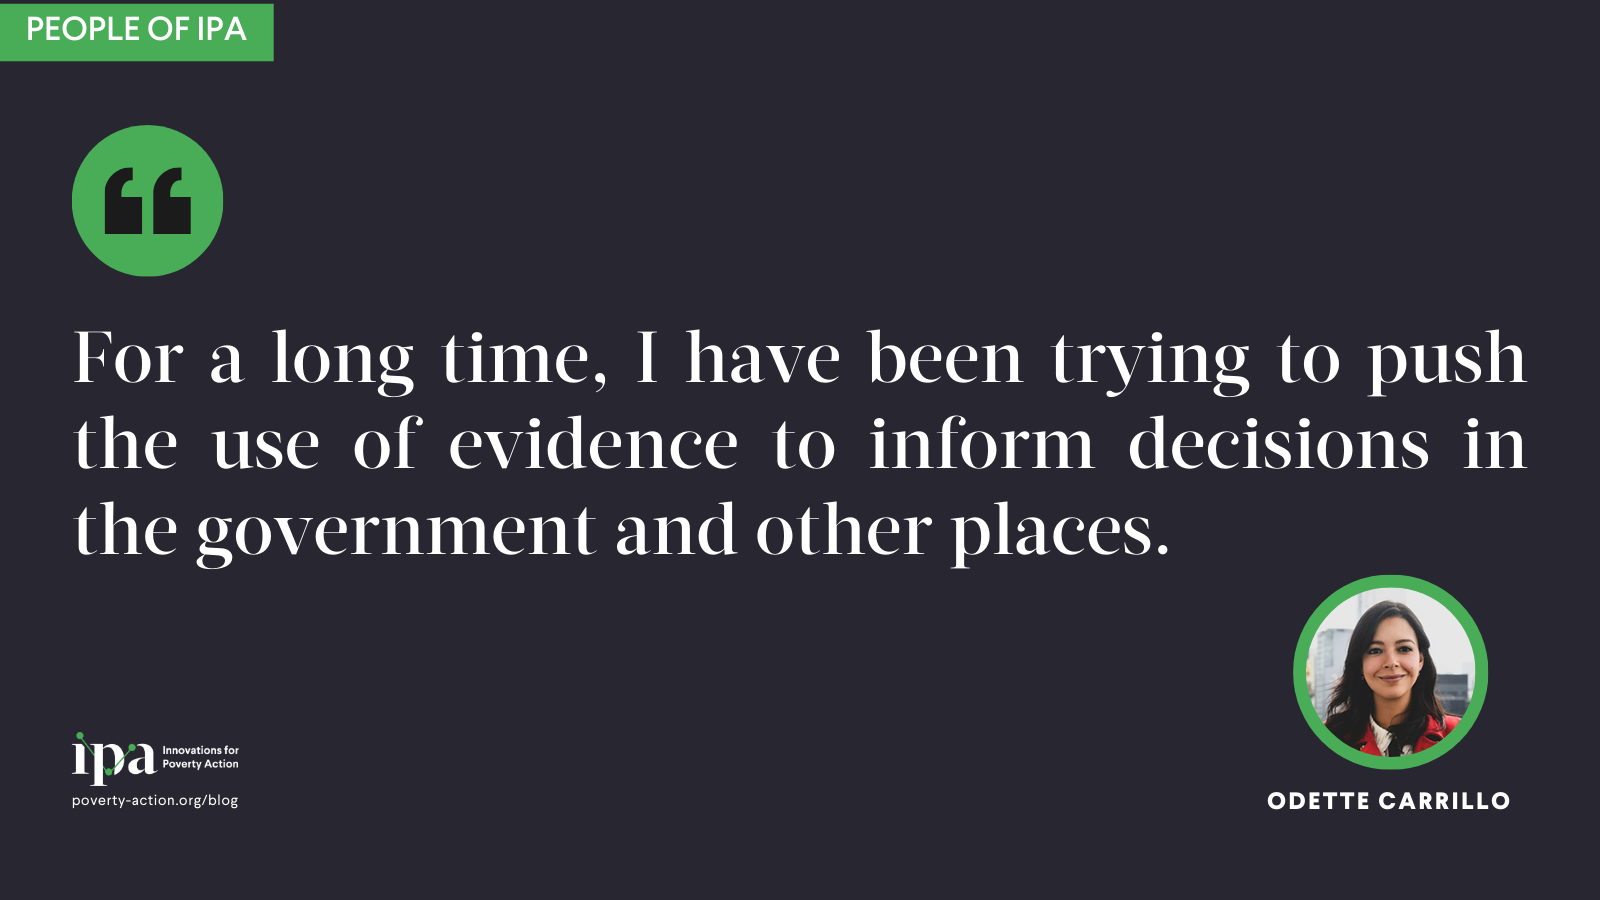 Odette says “For a long time,” she continues, “I have been trying to push the use of evidence to inform decisions in the government and other places.” 